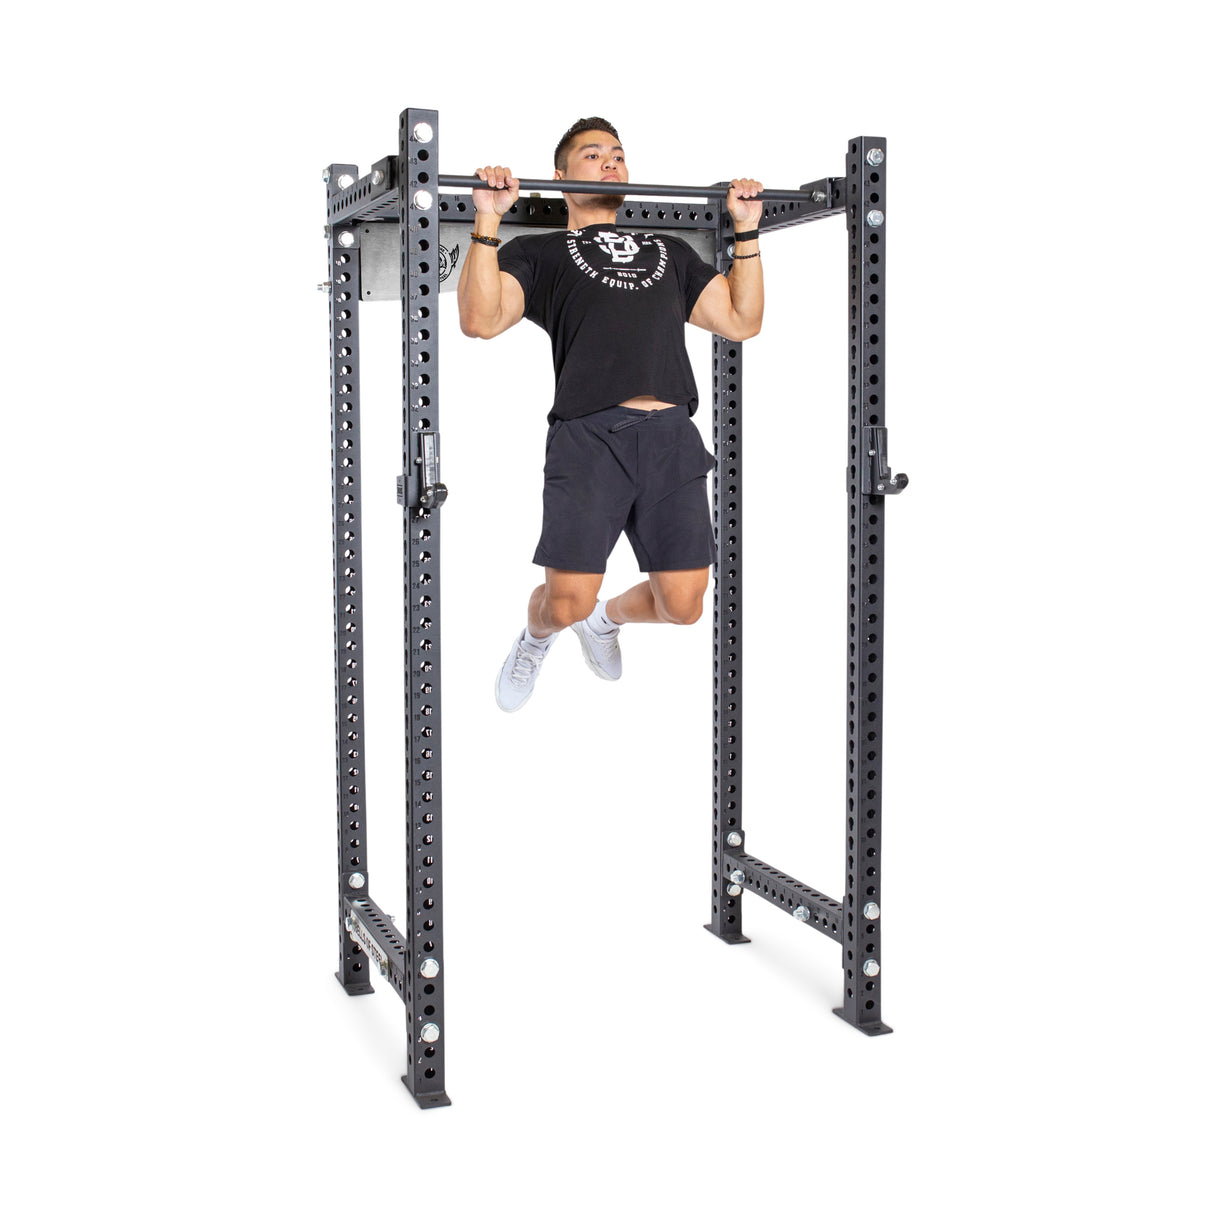 Male athlete doing pull-up with Adjustable Pull-up Bar Rack Attachment - Manticore